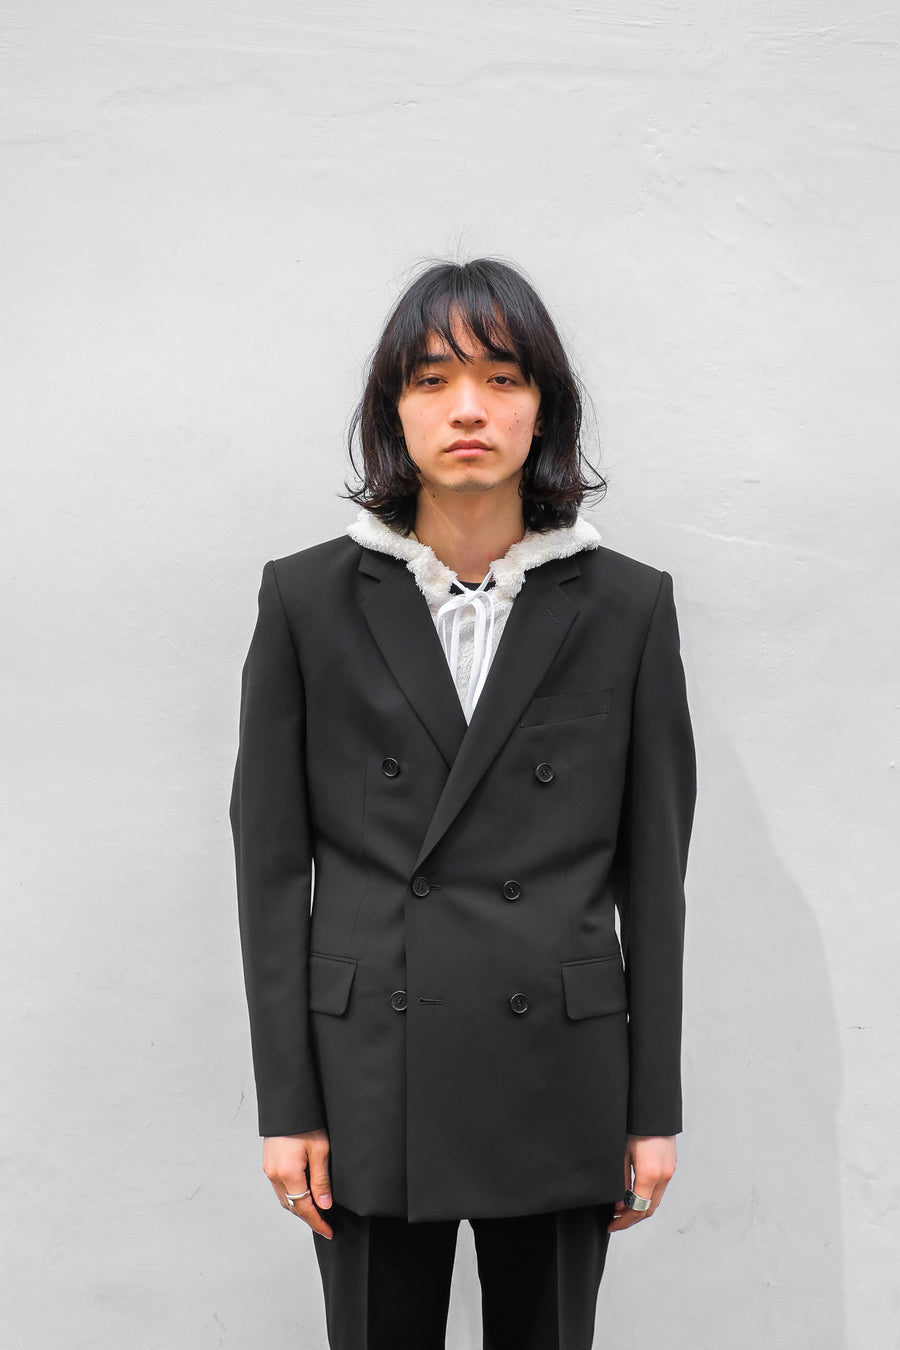 LITTLEBIG(リトルビッグ)の22ss 6B Double Breasted Jacket Black or ...